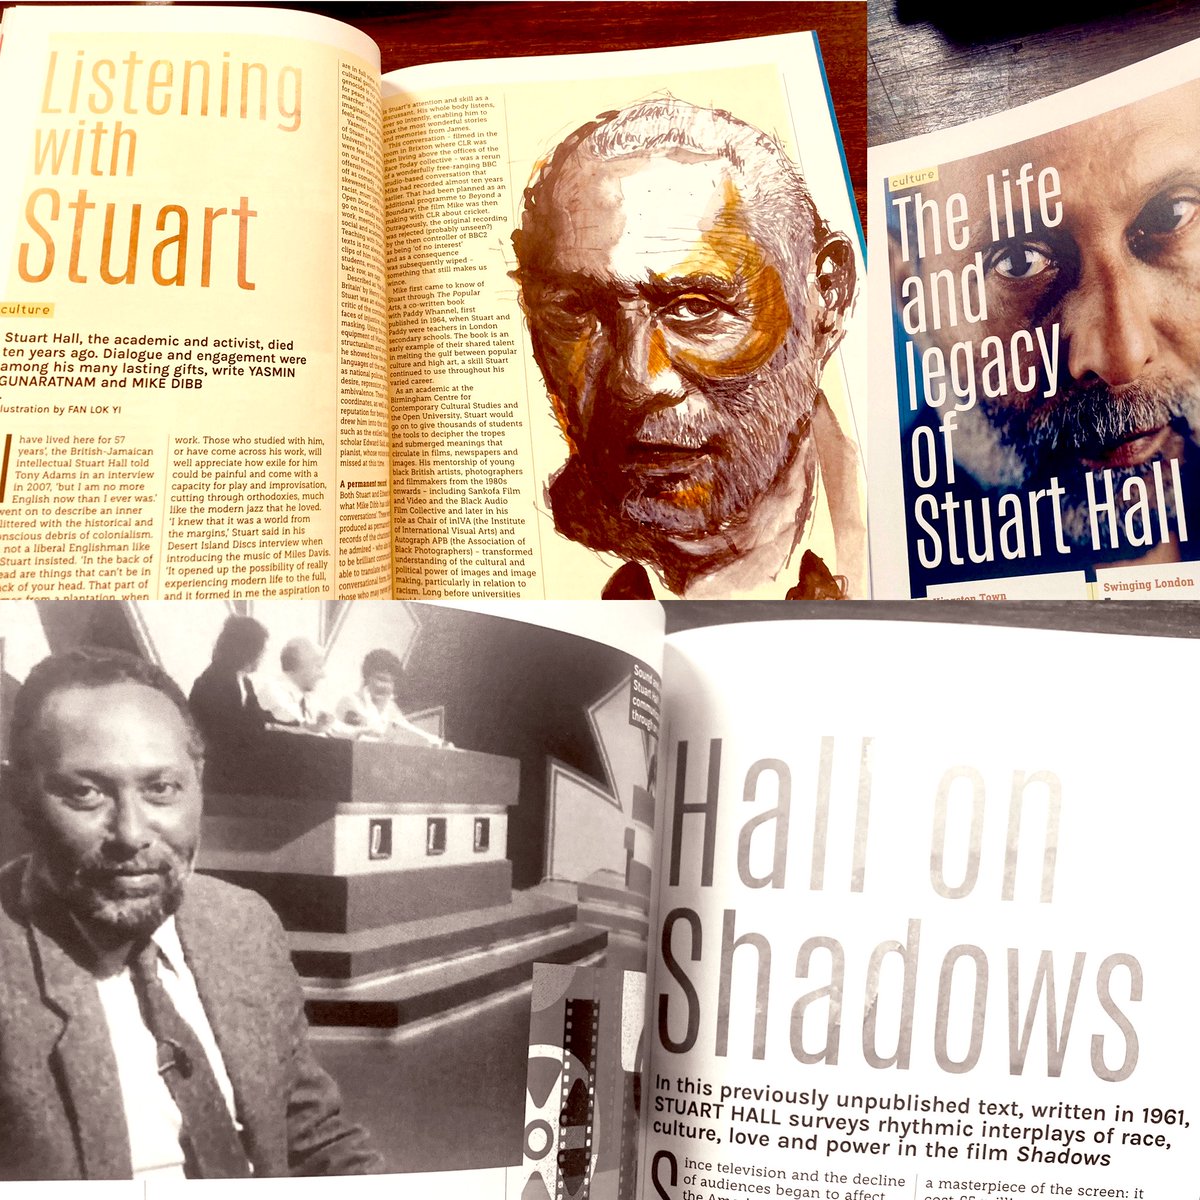 I’ve curated a special section in the new @RedPeppermag on the late Stuart Hall, 10 years after his death. Features: - Hall’s previously unseen review of John Cassavettes ‘Shadows’ - Reflections from co-workers Mike Dibb & @YasminGun - histories of radical Birmingham & much more